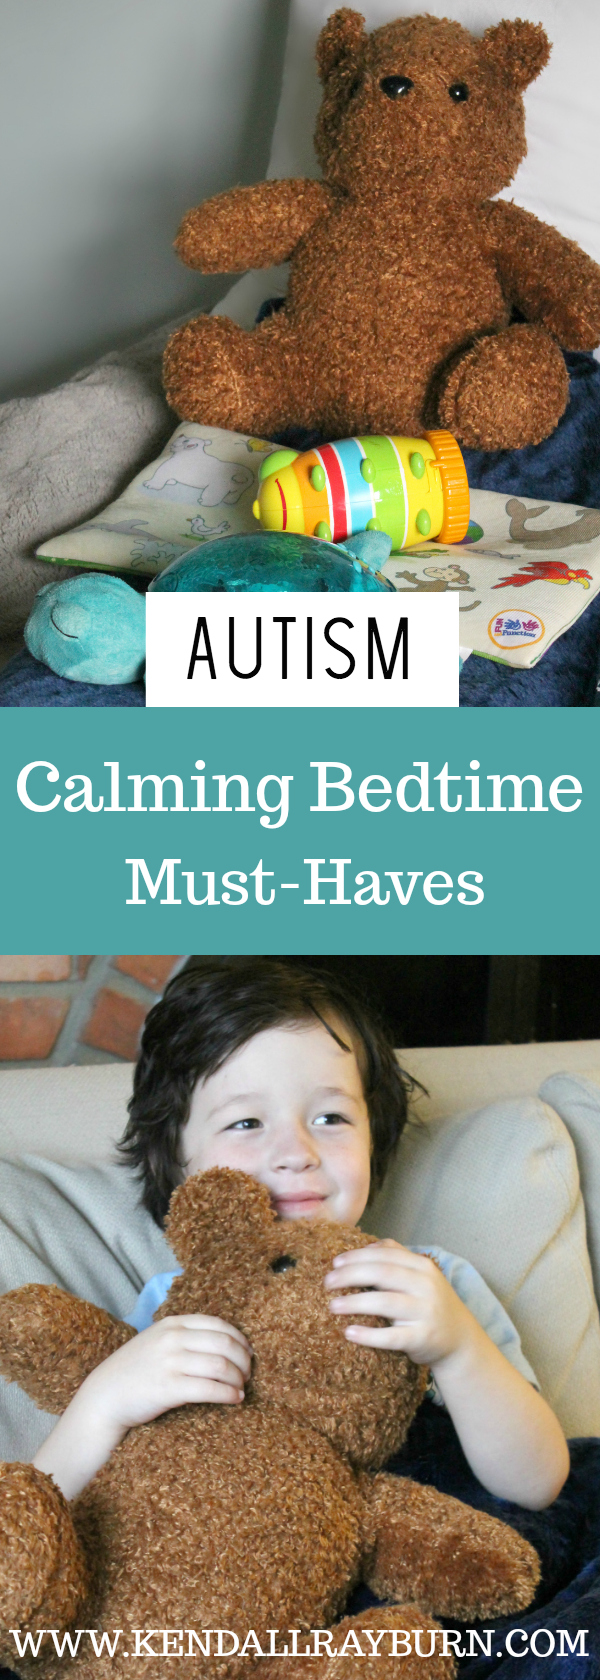 Calming Bedtime Must-Haves for Kids on the Autism Spectrum